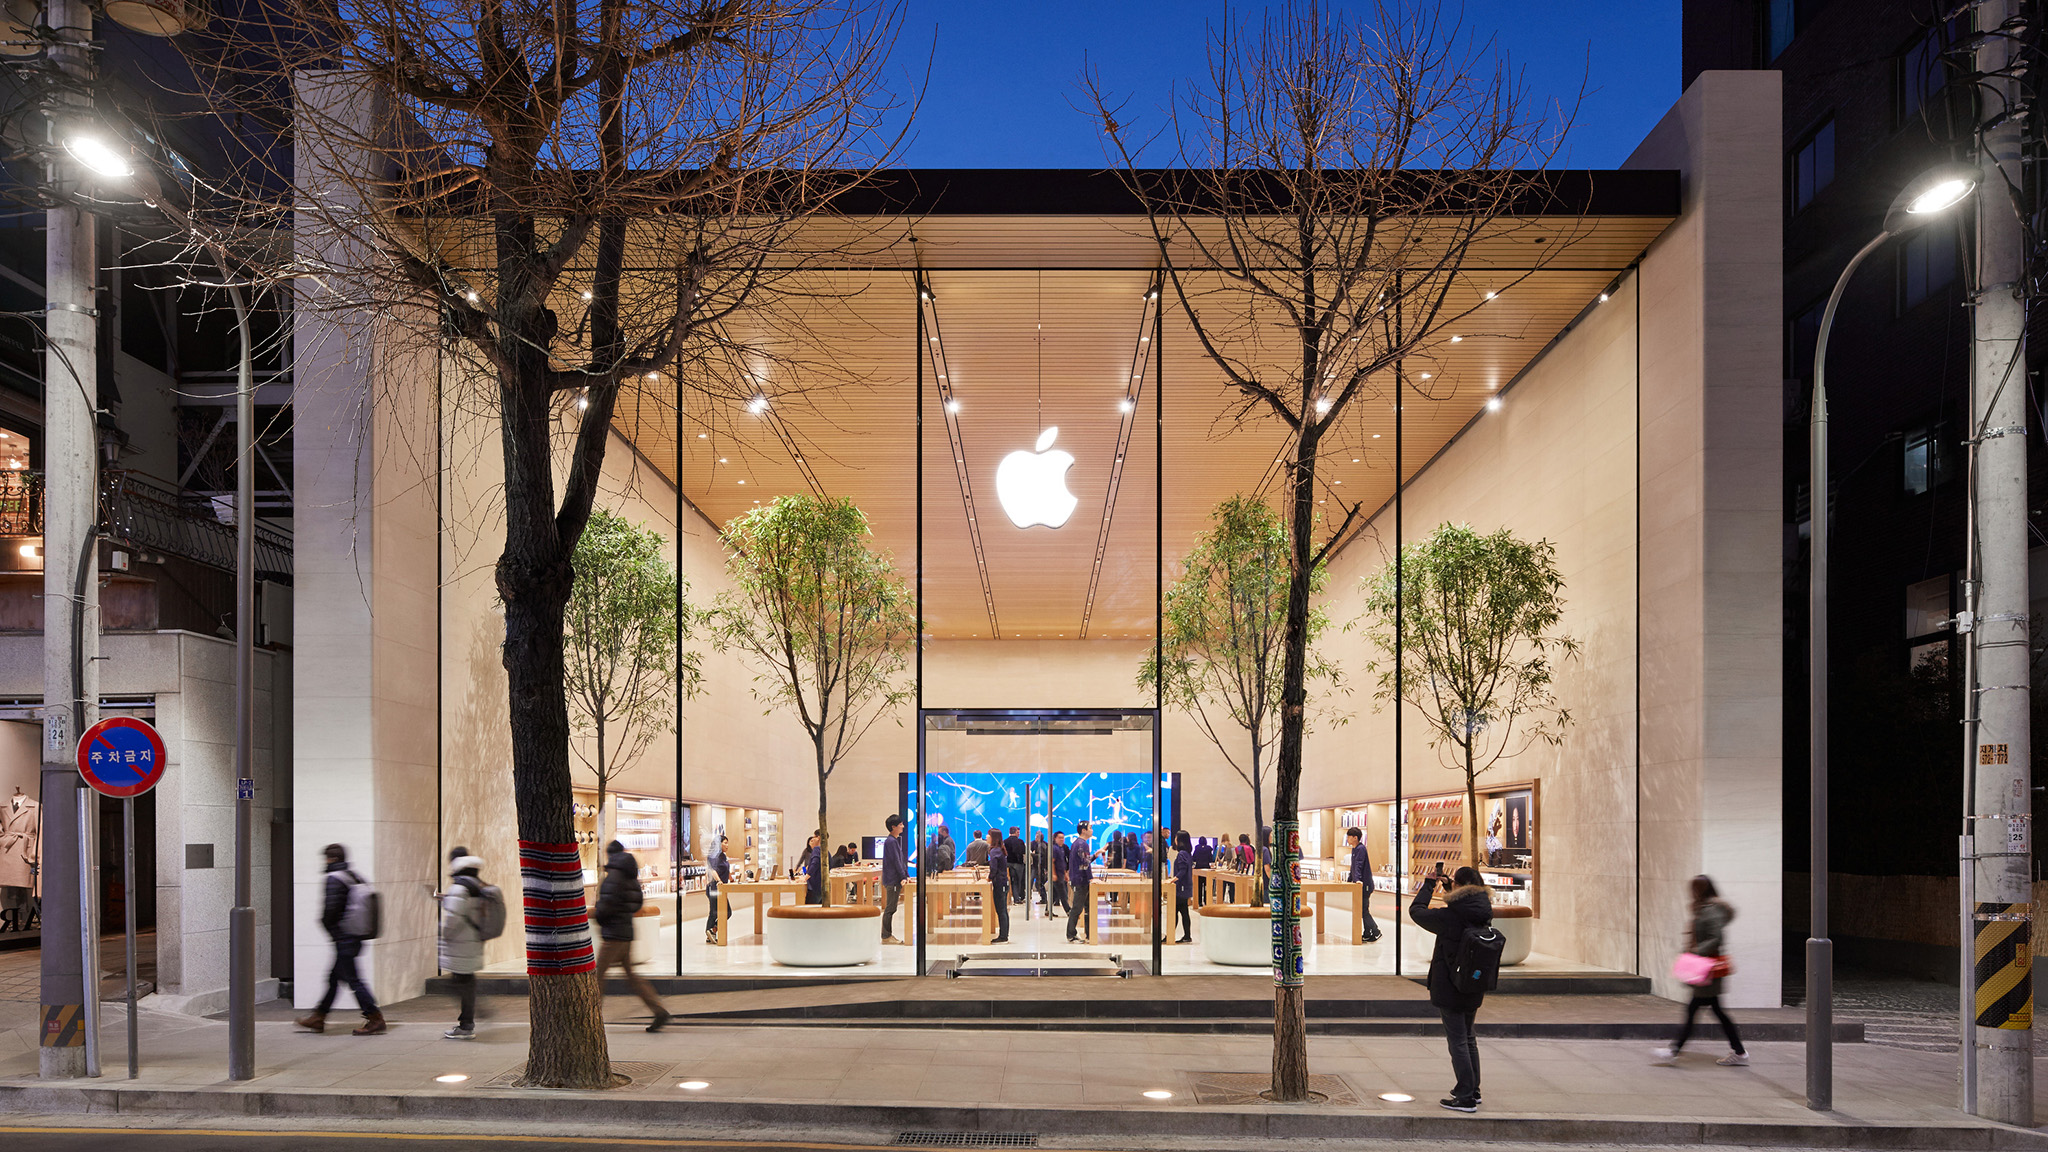 Designer depicts Apple Stores from around the world in different  architectural styles - Yanko Design